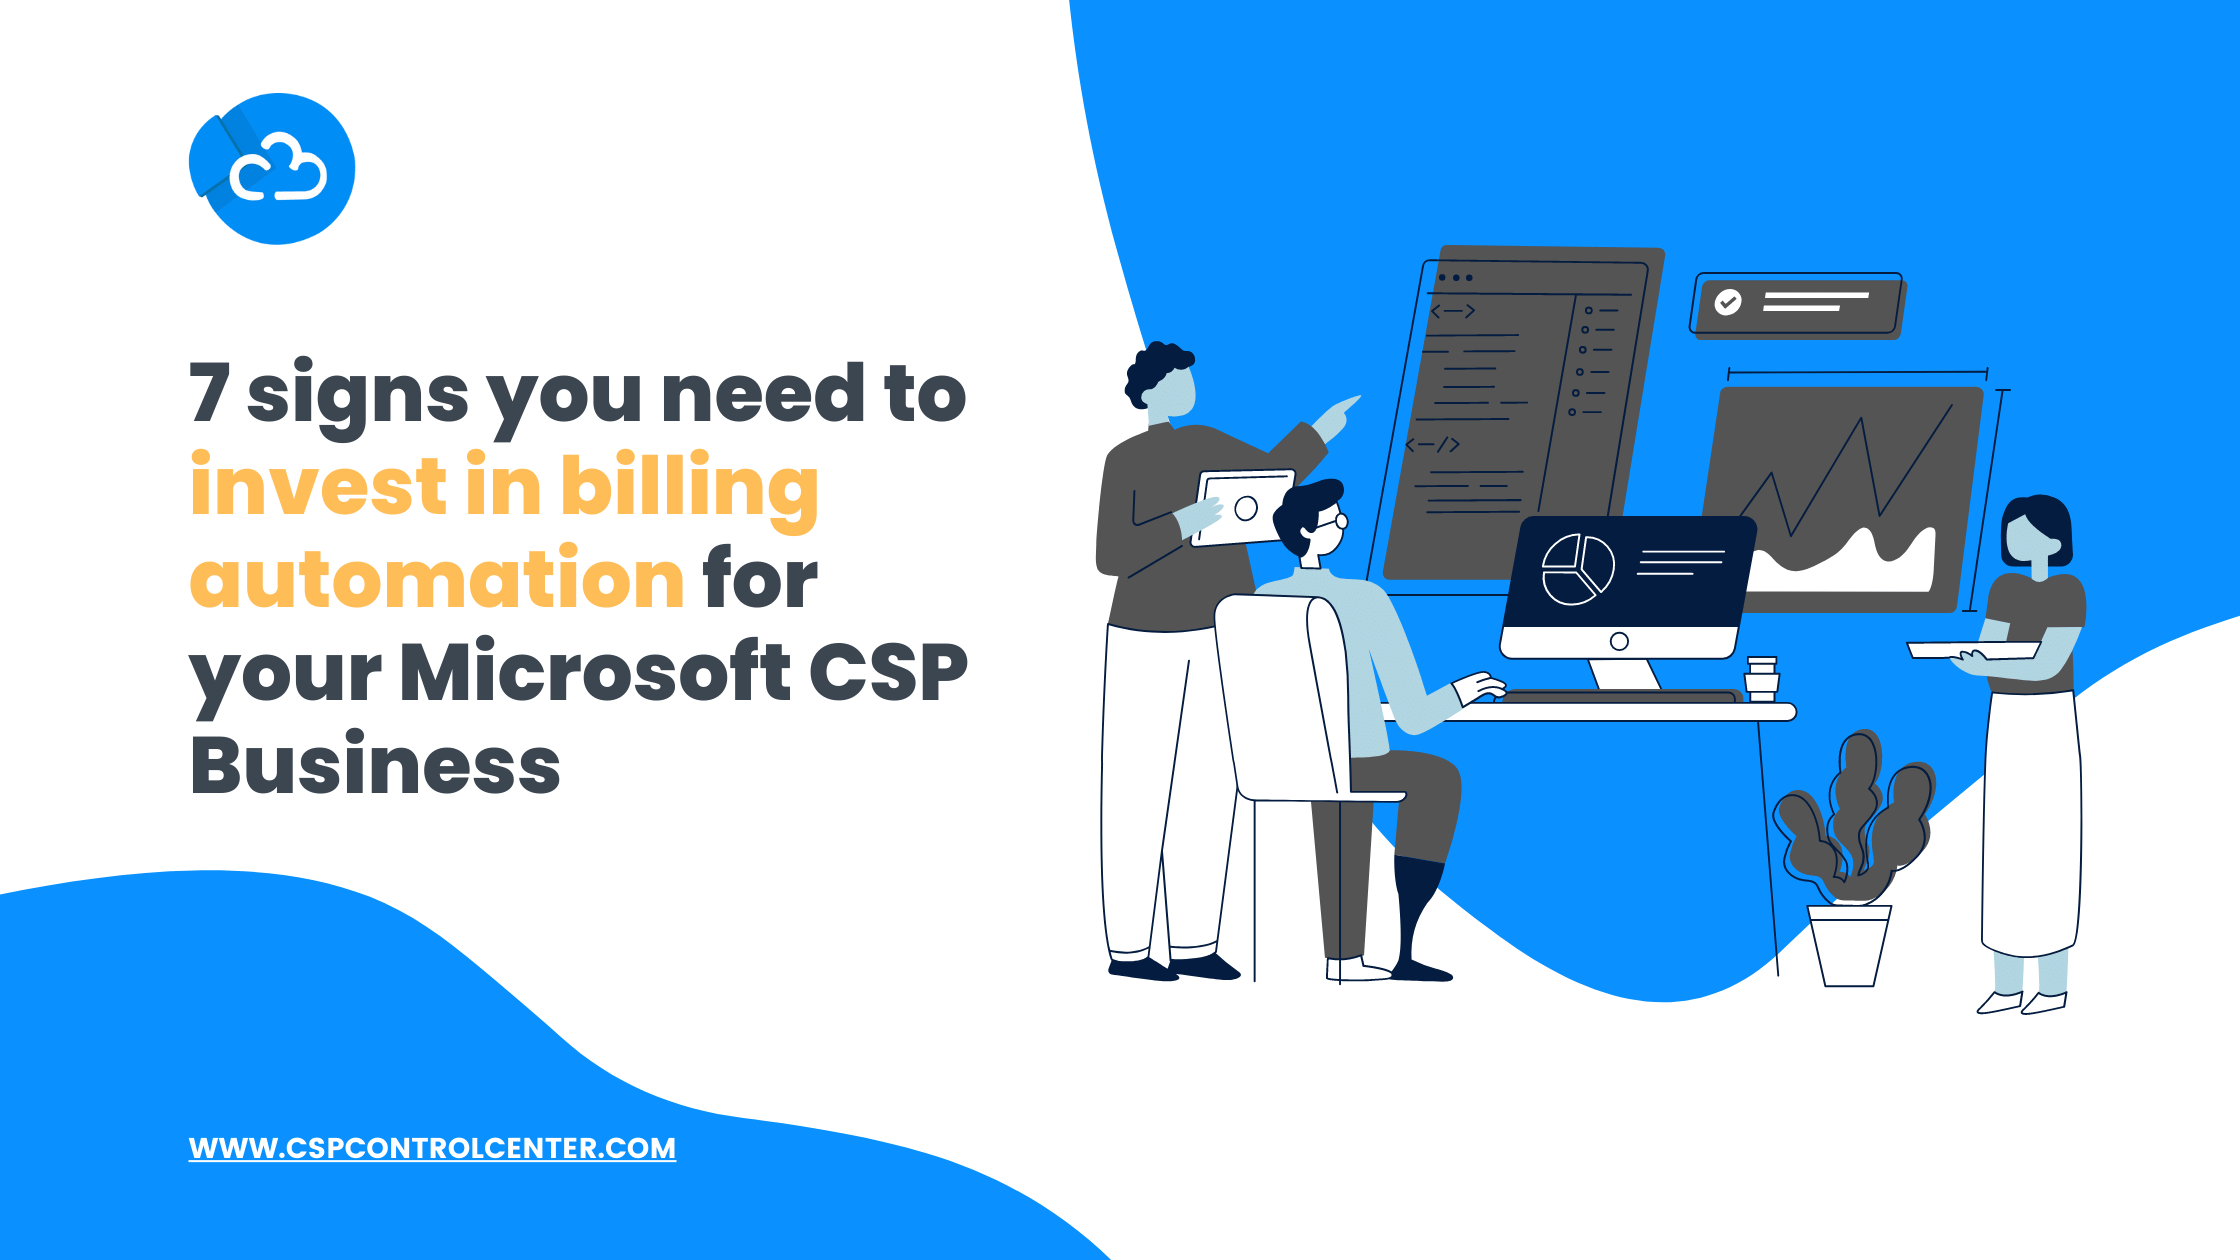 7 Signs you need to Invest in billing automation for Your Microsoft CSP Business